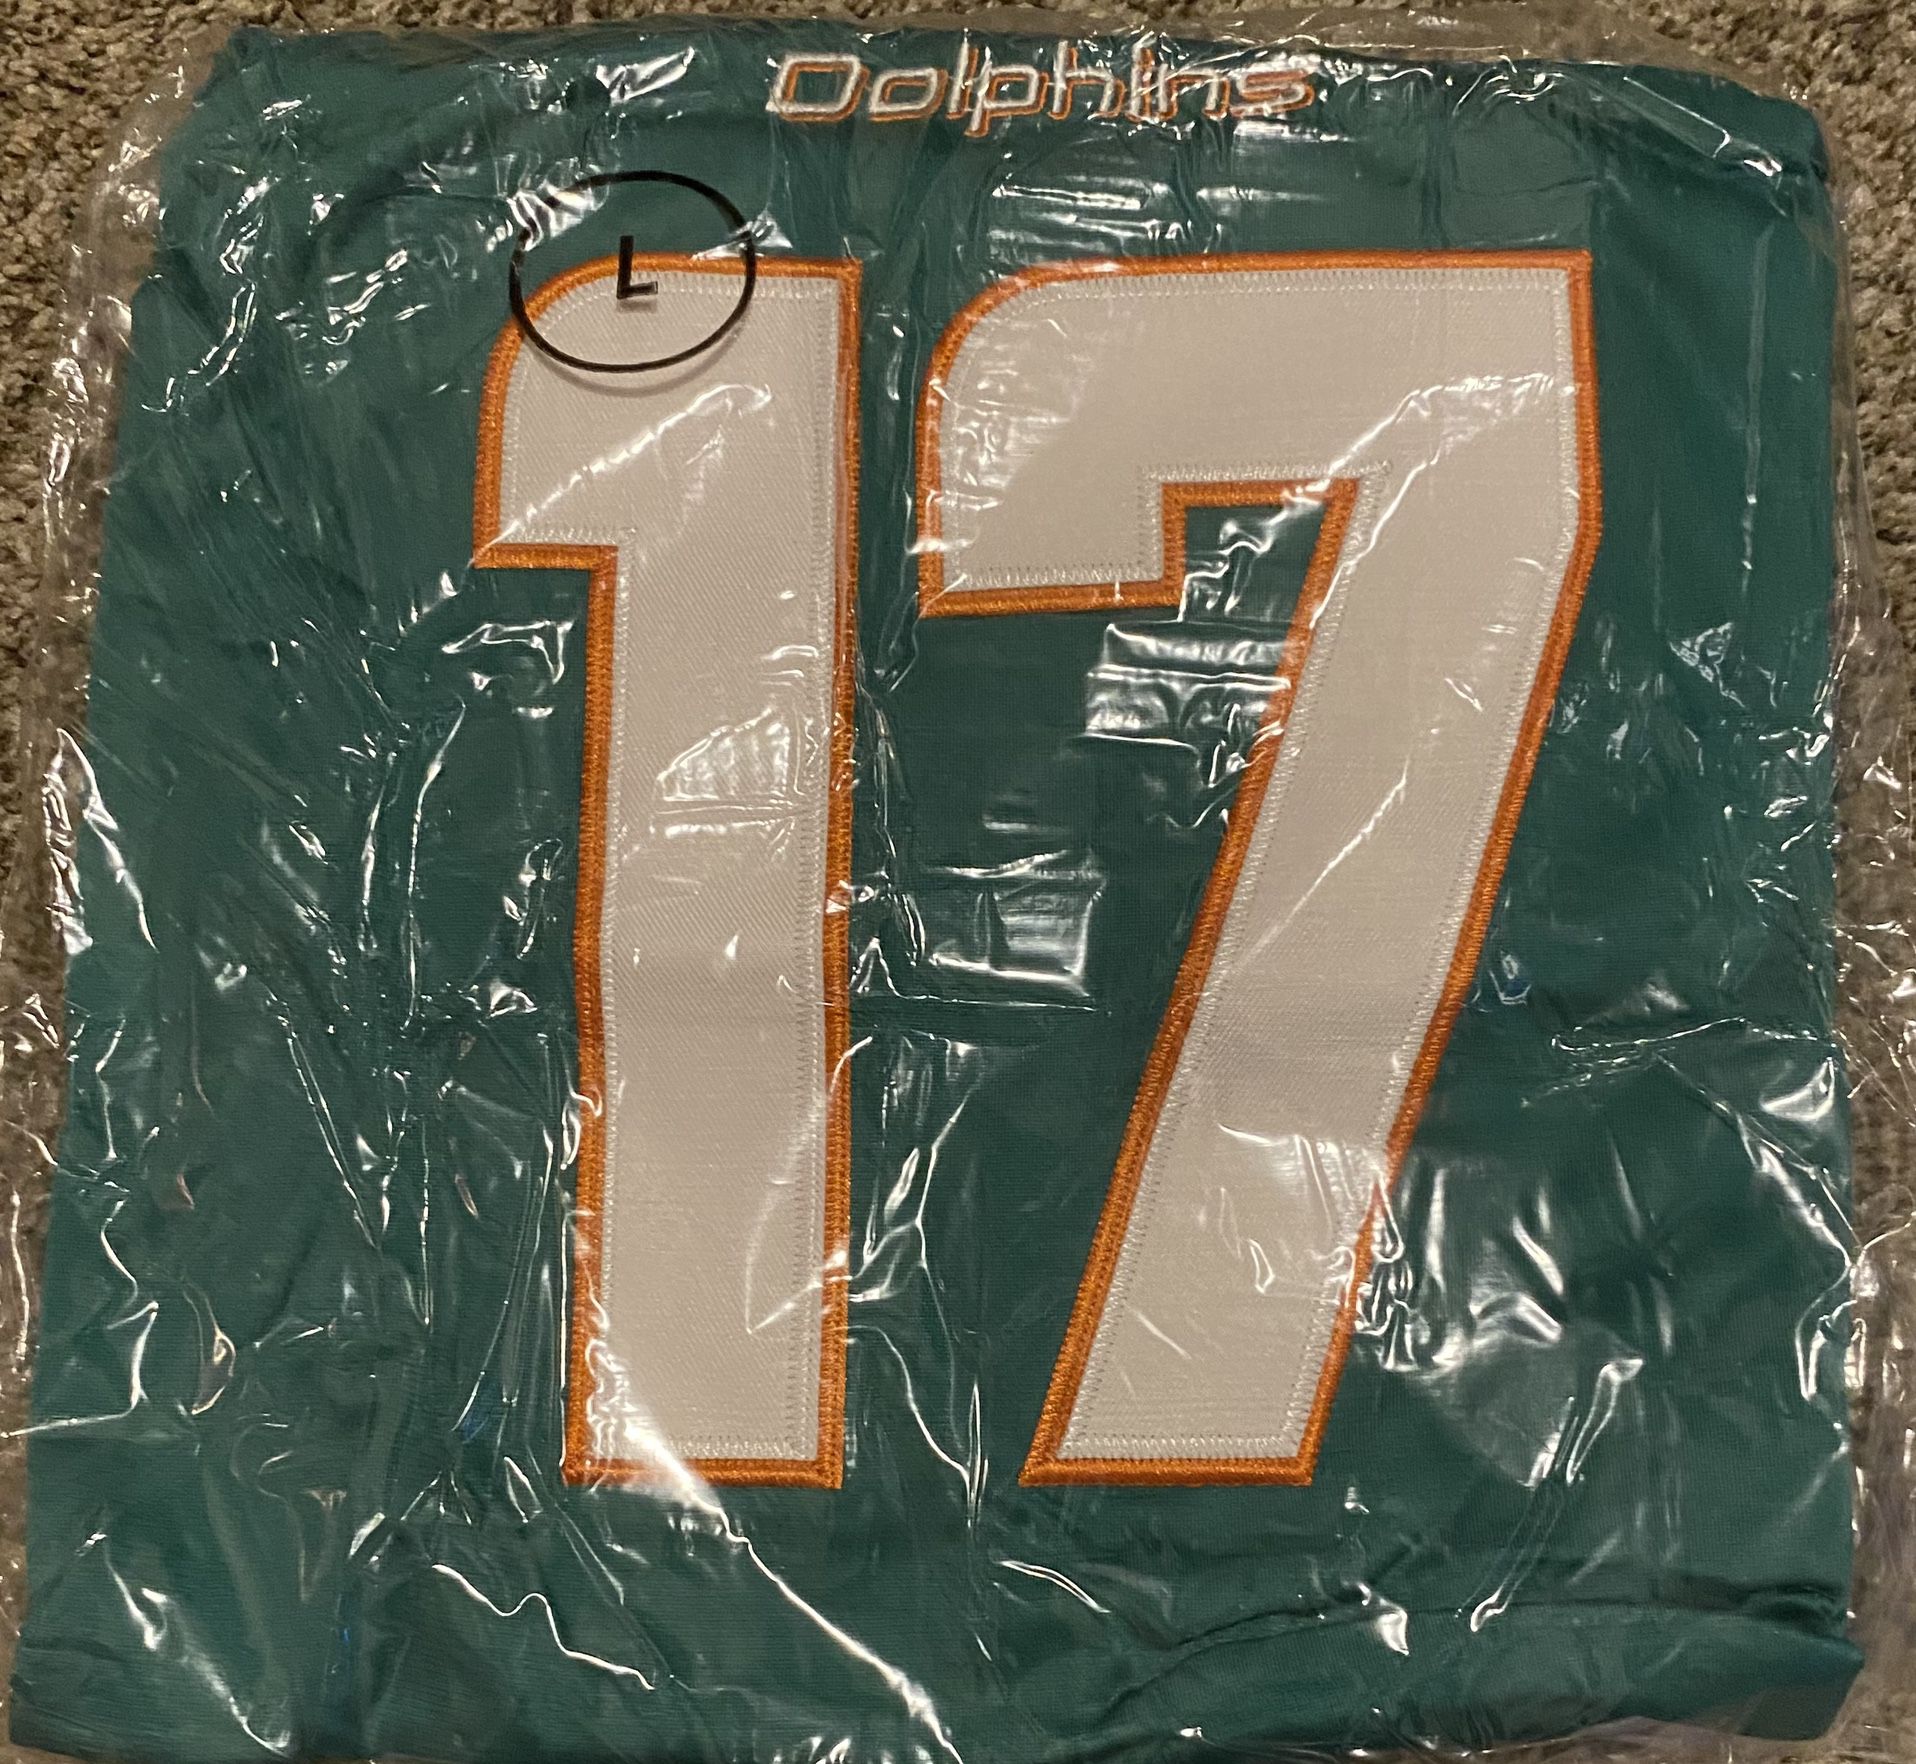 waddle nfl jersey